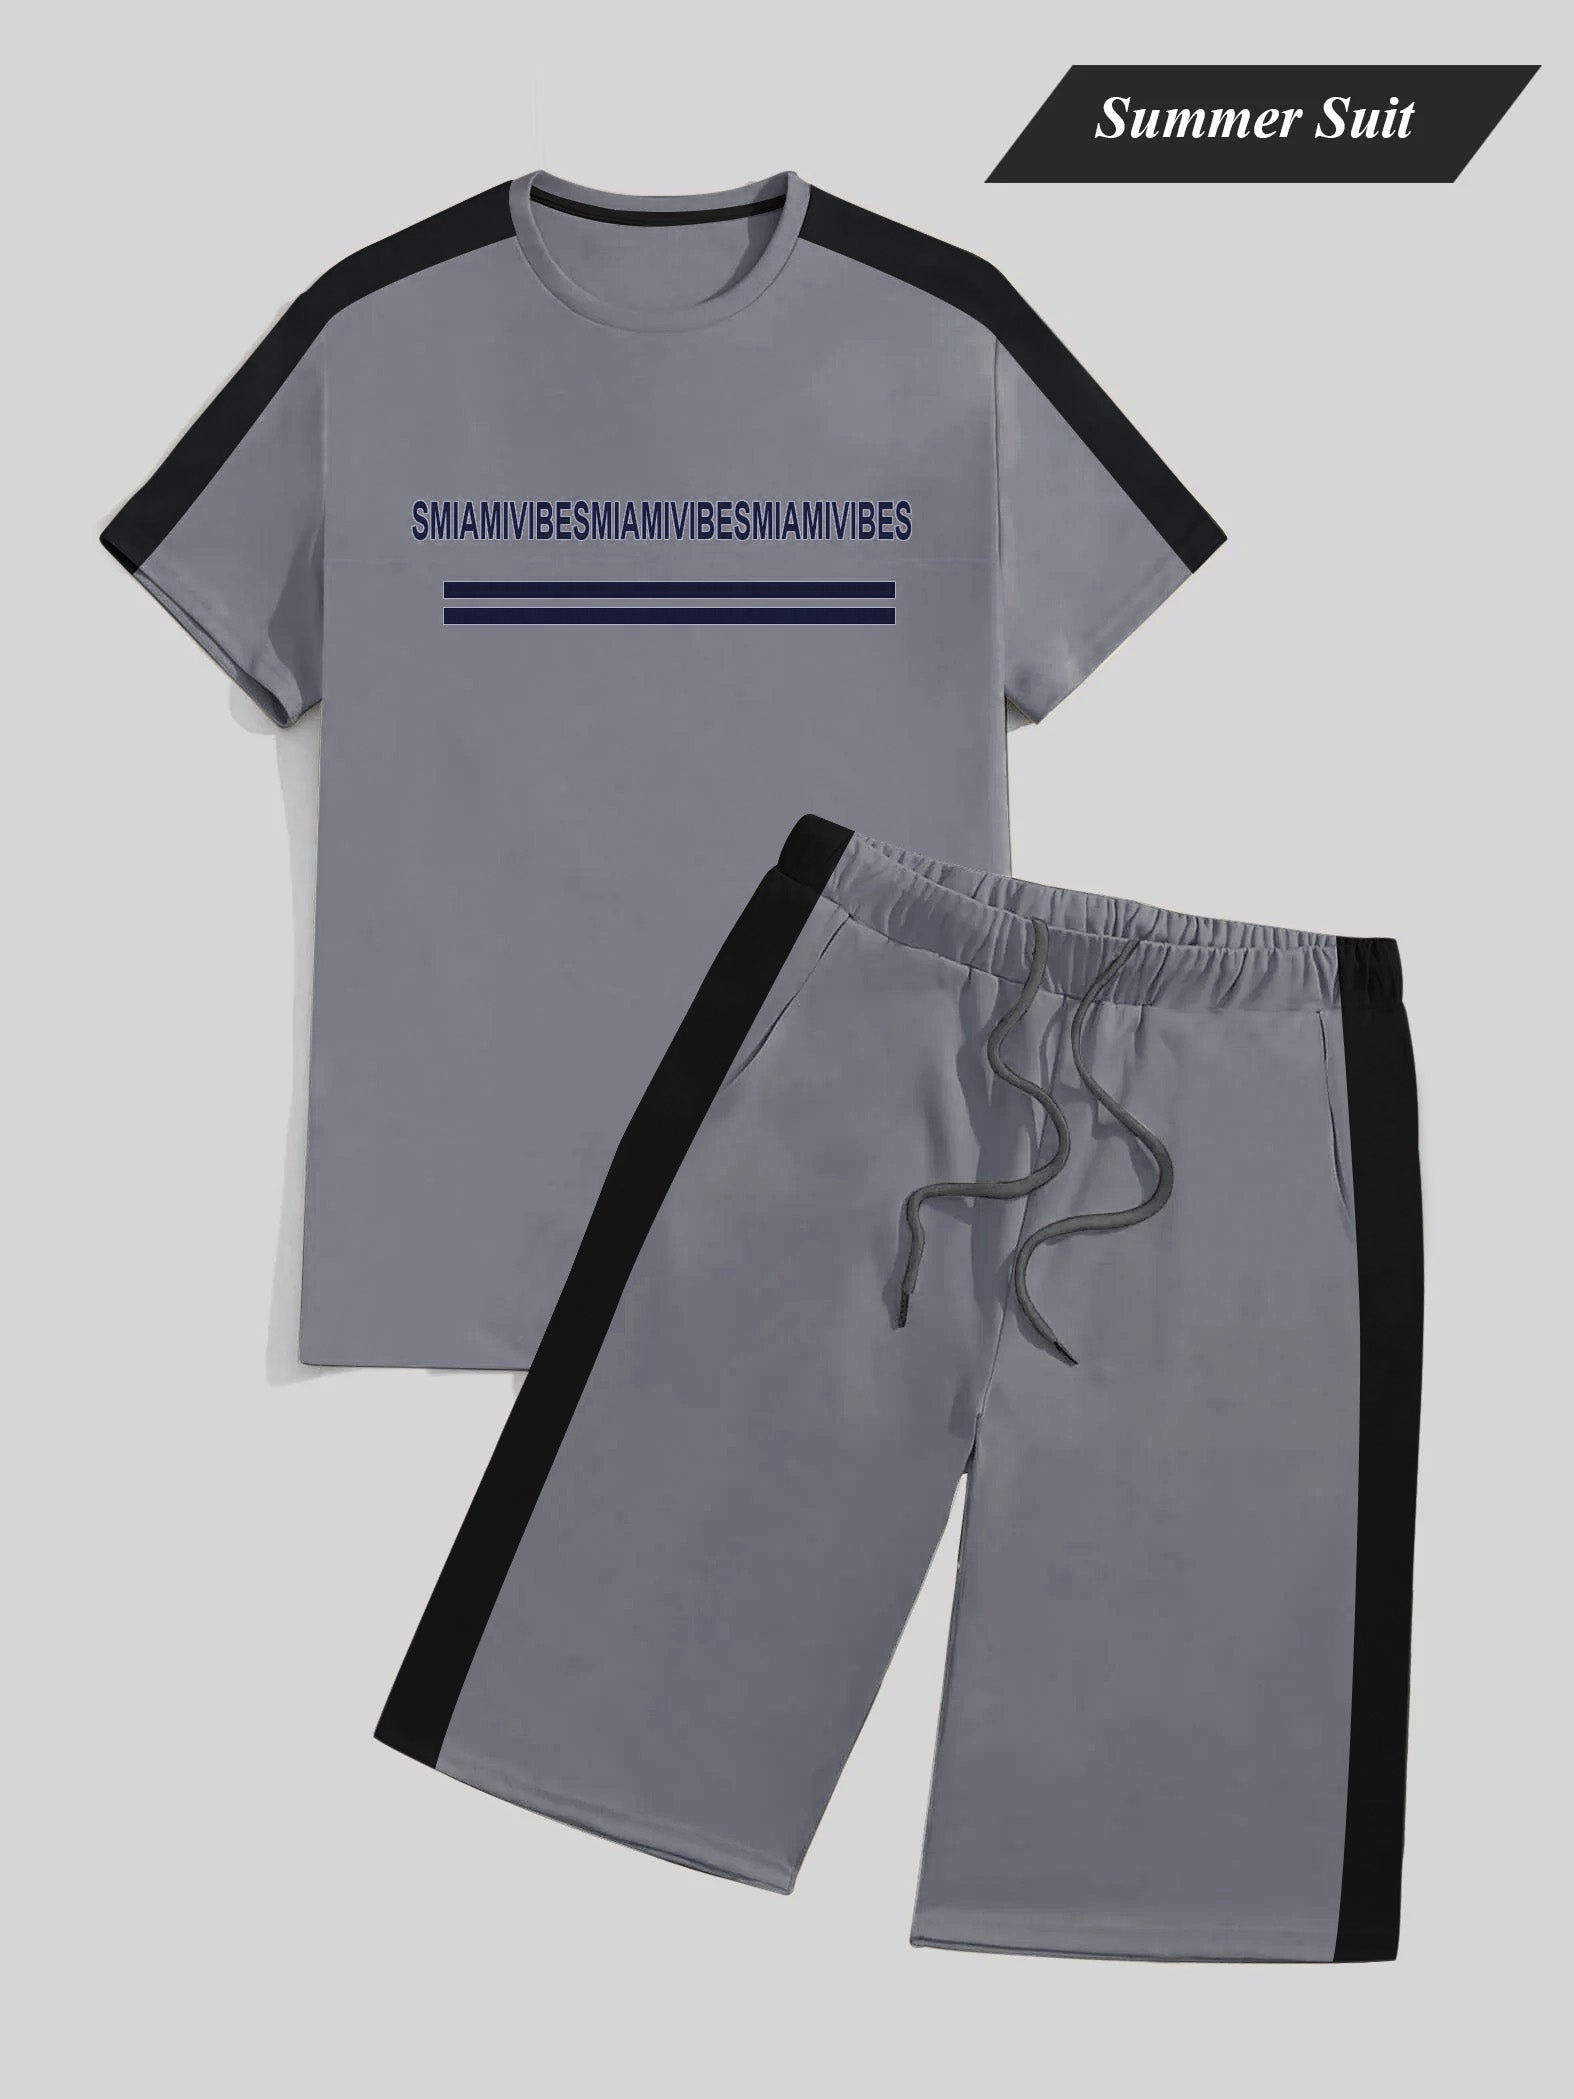 Summer Fashion T-Shirt & Lounge Short Suit For Men-Slate Grey with Black Panel-BE897/BR13156